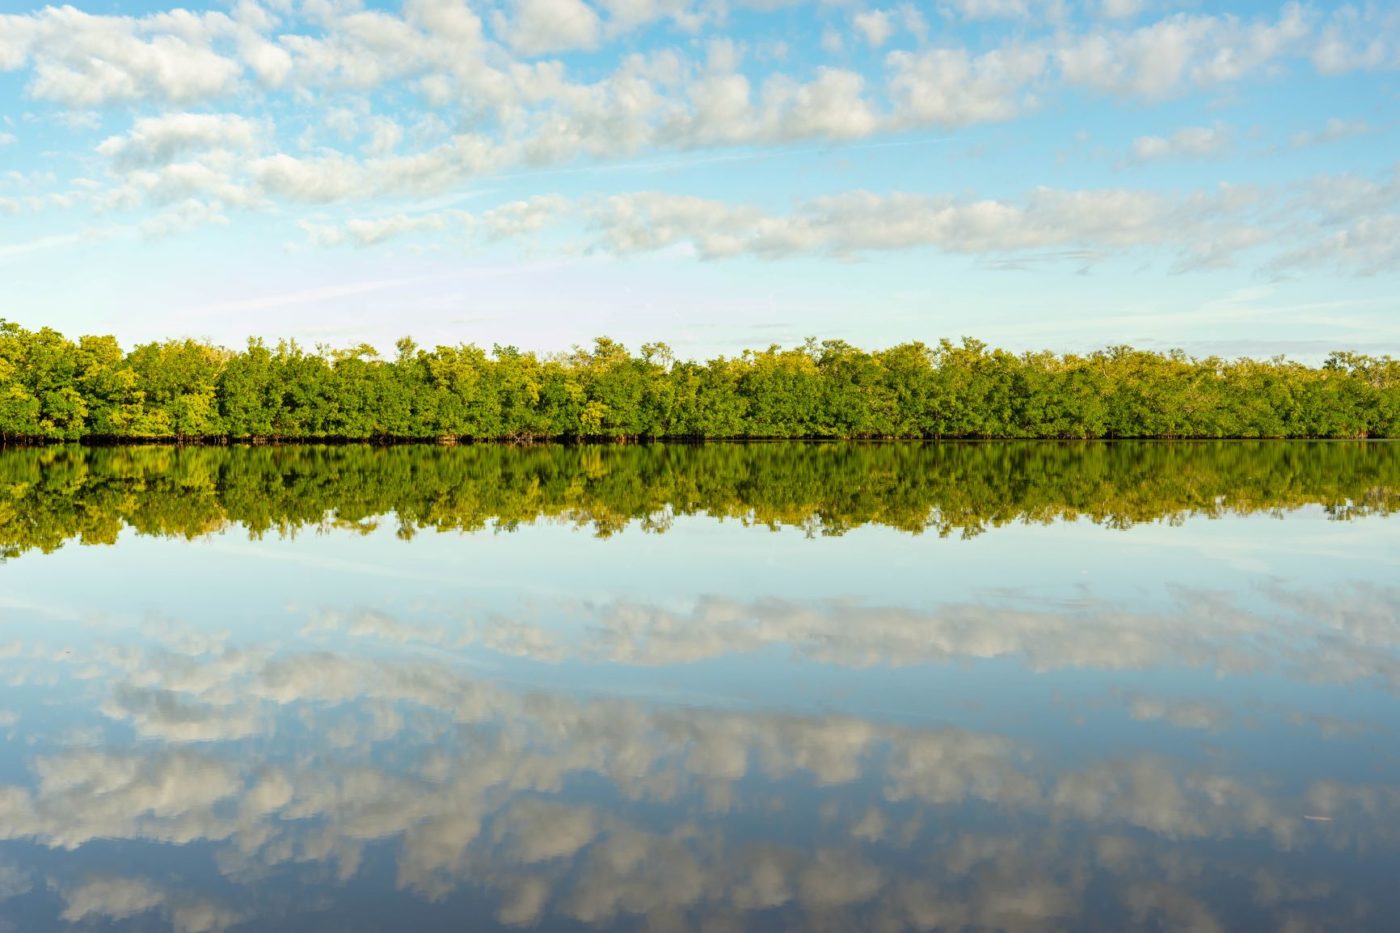 A line of mangroves and a blue with clouds reflected in the water